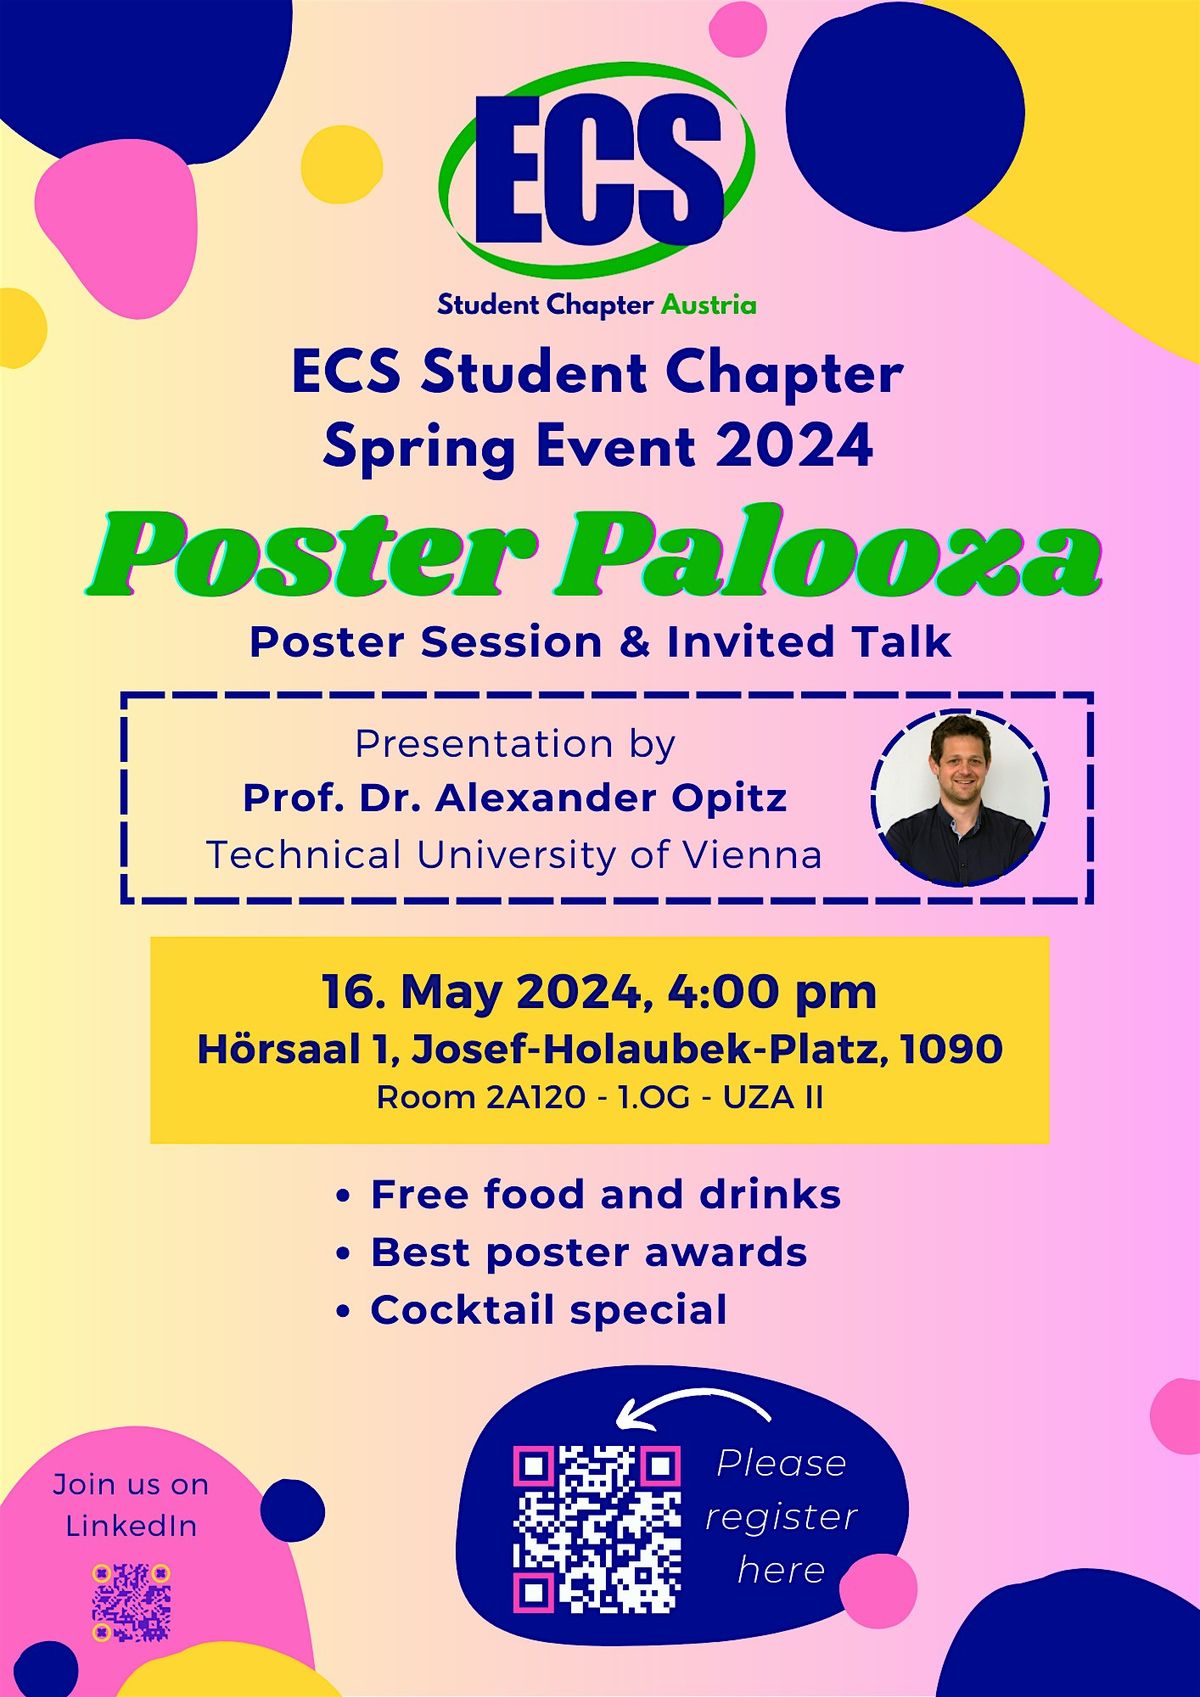 ECS Student Chapter Spring Event 2024 - Poster Palooza